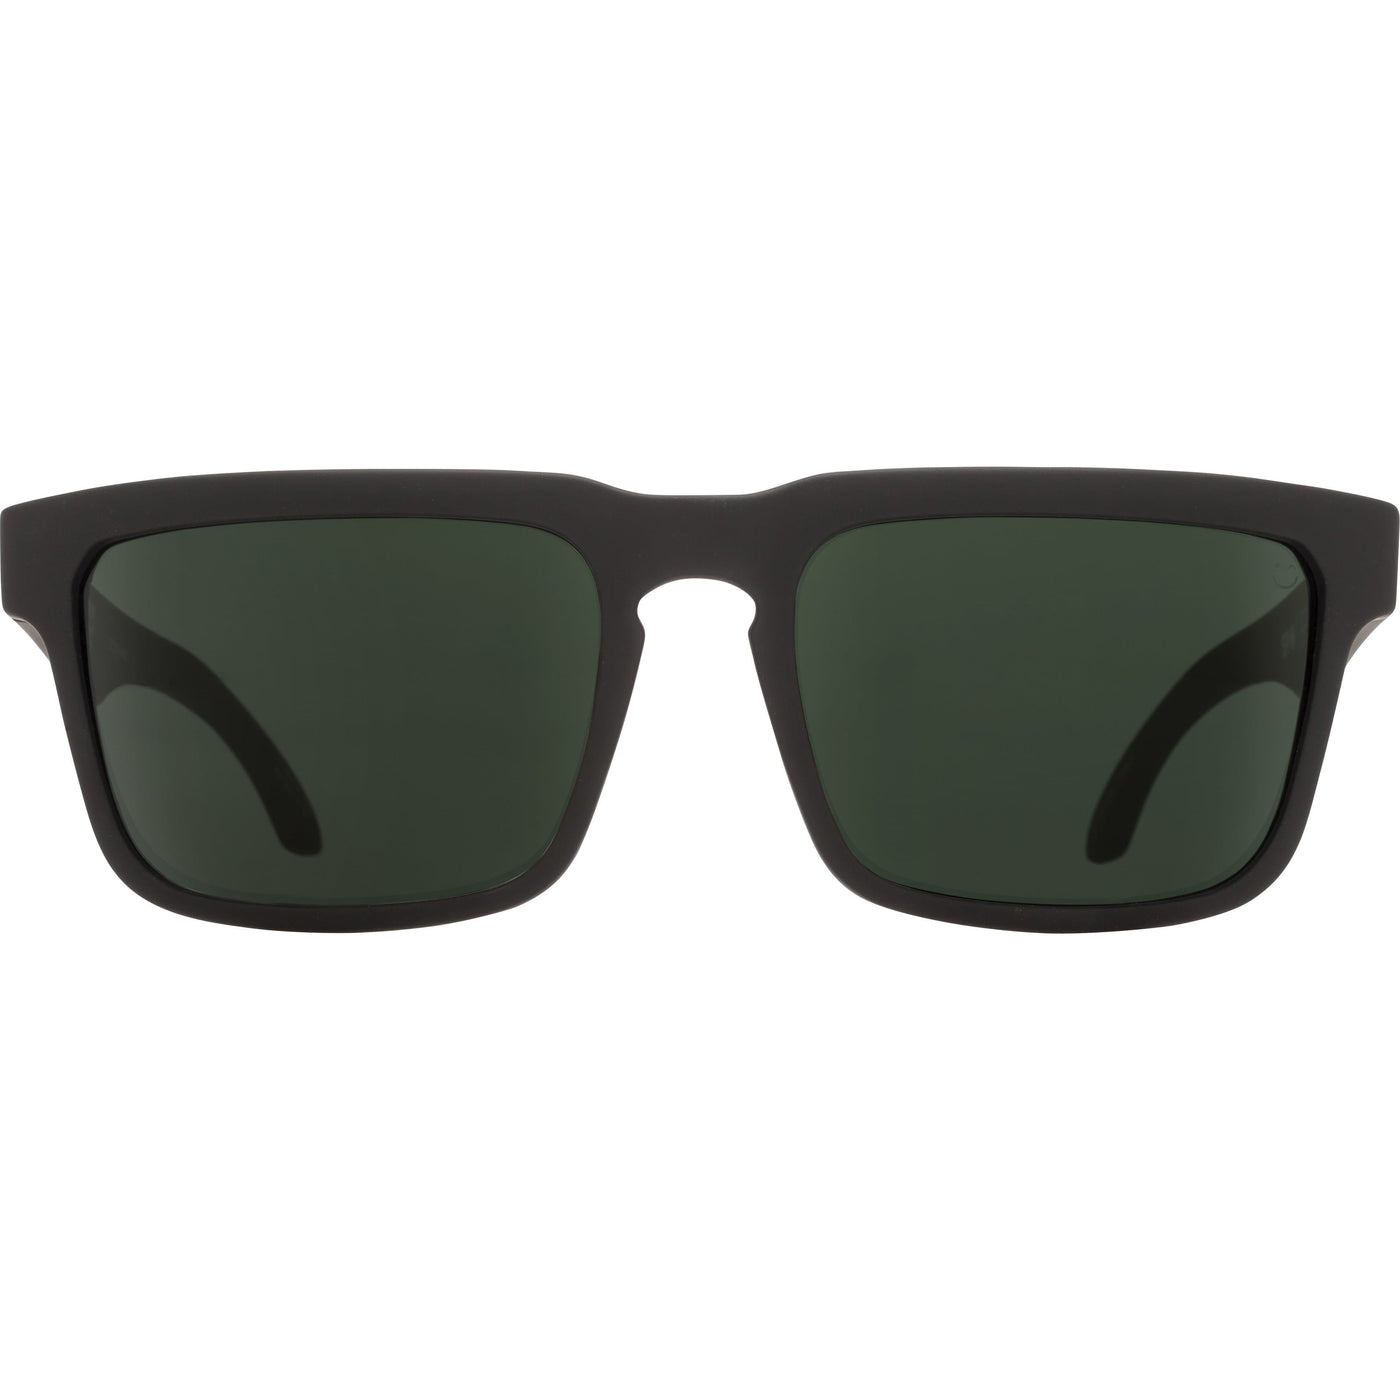 SPY HELM Sunglasses, Happy Lens - Gray/Green 8Lines Shop - Fast Shipping